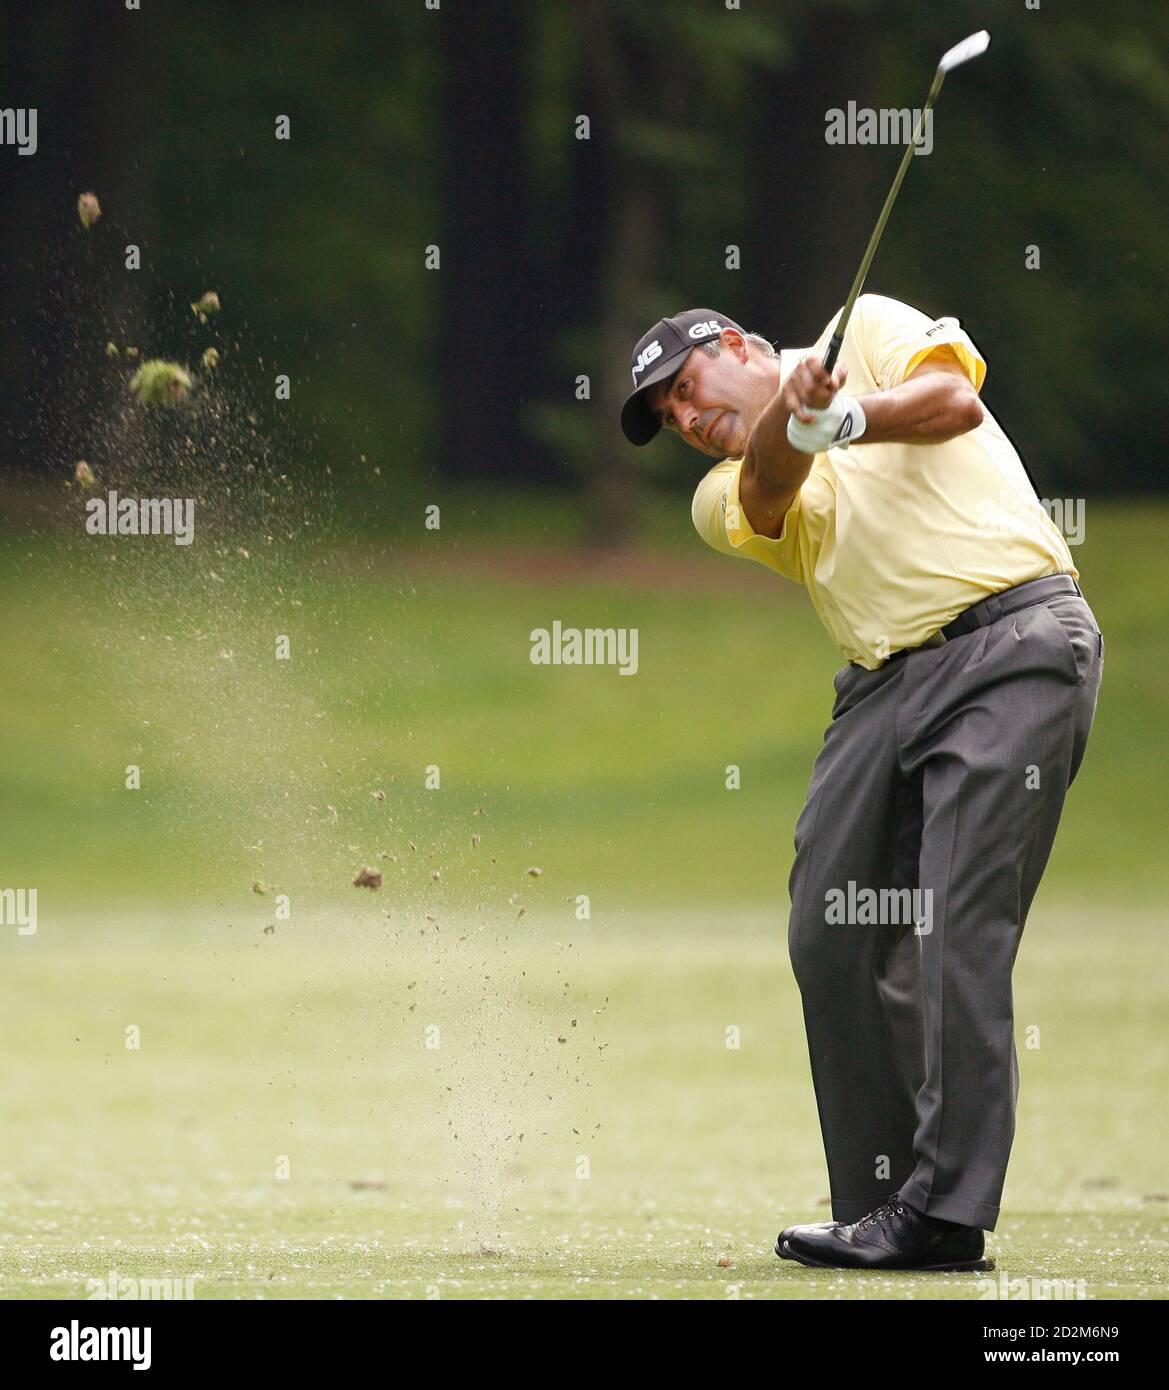 Angel Cabrera of Argentina hits from the fairway on the 12th hole during the final round of the Quail Hollow Championship in Charlotte, North Carolina May 2, 2010. REUTERS/Jason Miczek (UNITED STATES - Tags: SPORT GOLF) Stock Photo